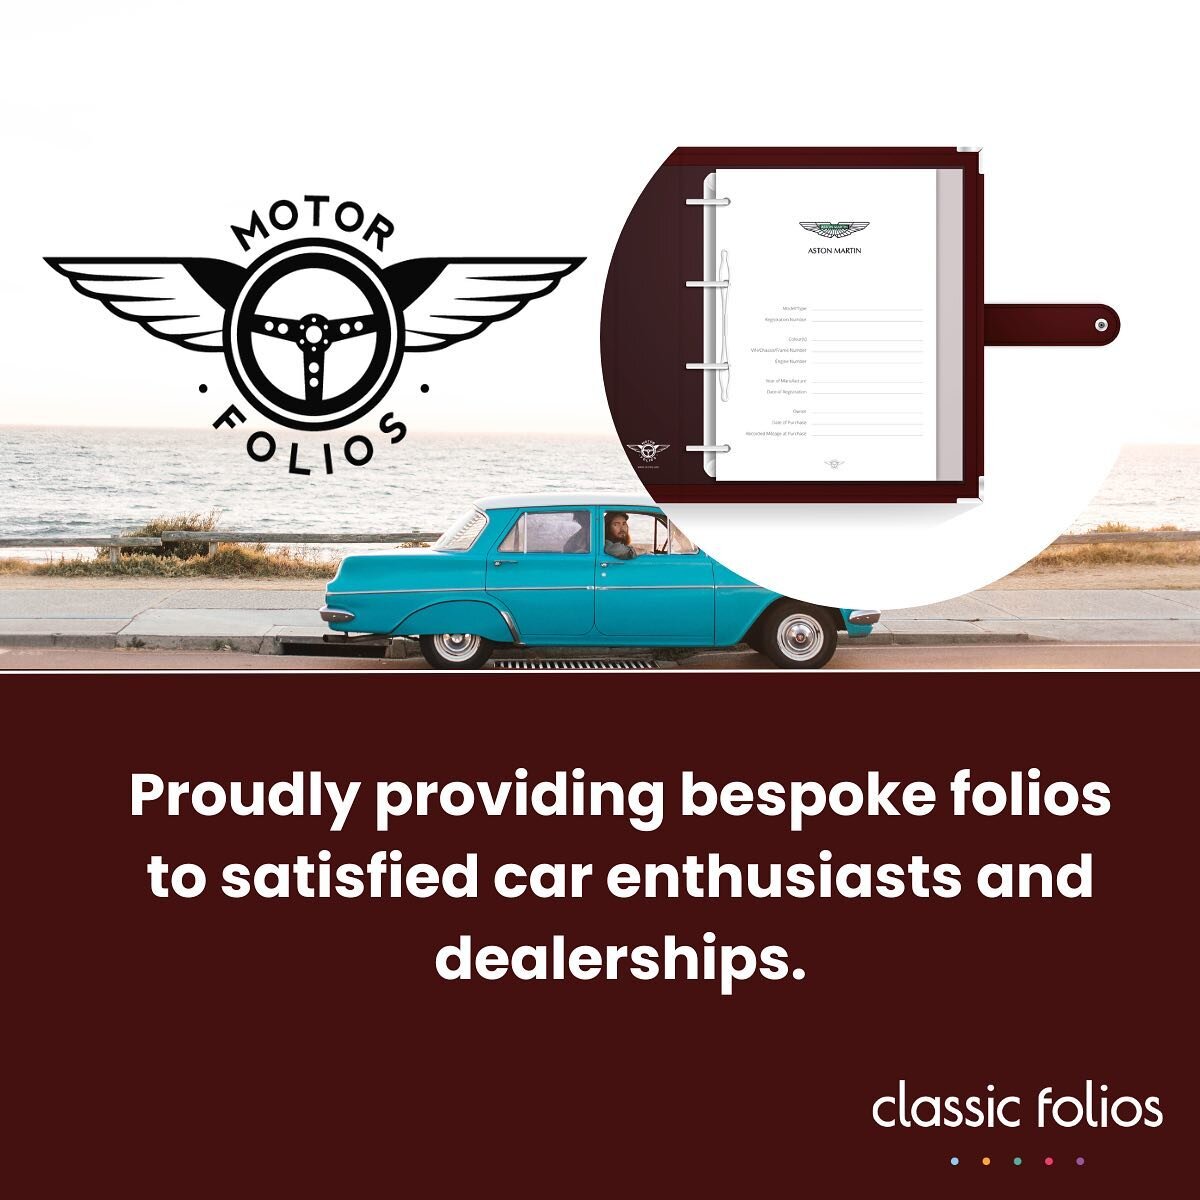 Motor Folios is the ultimate solution for car documentation!

Our personalised leather-bound Folios provide the perfect template for handwritten notes on vehicle specifications, technical data and more.

Available in four elegant colours, our hand-fi